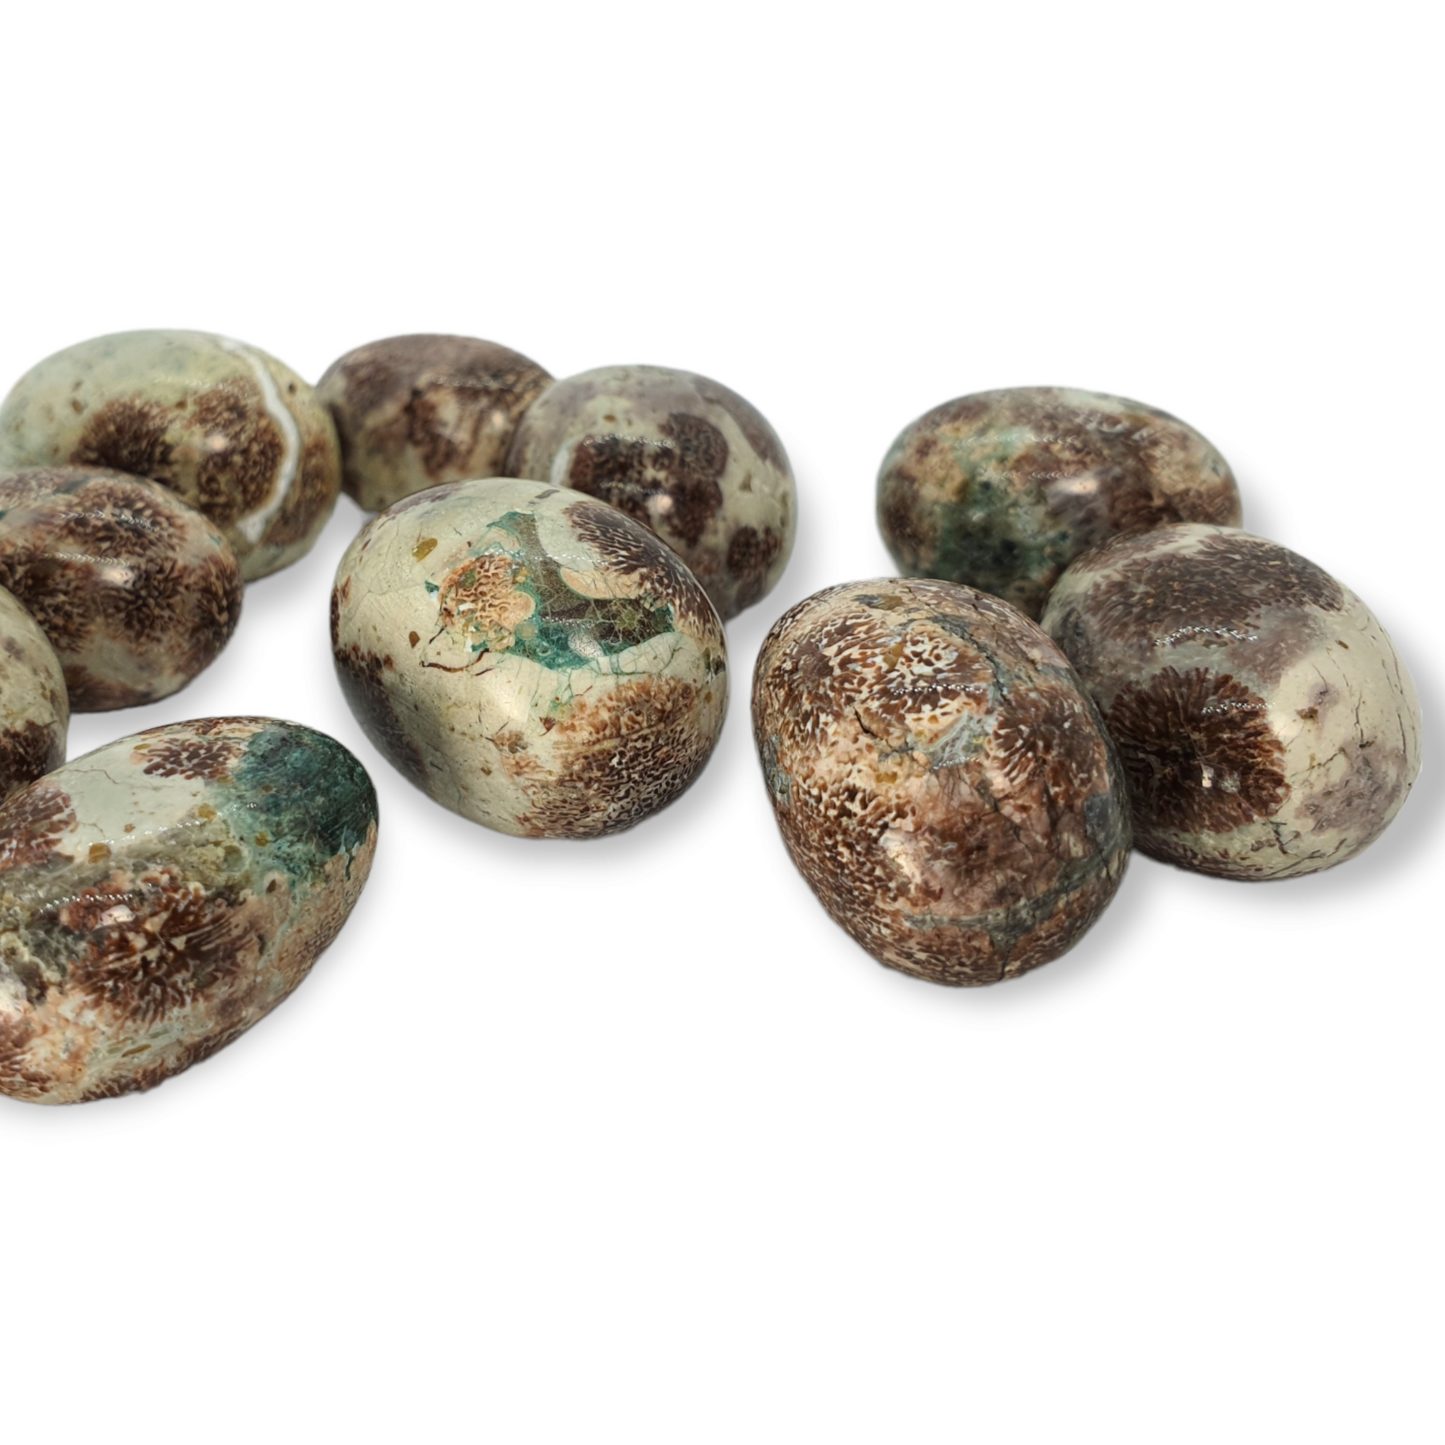 Crystals - Agate (Russian Flower Agate) Tumbled Stone